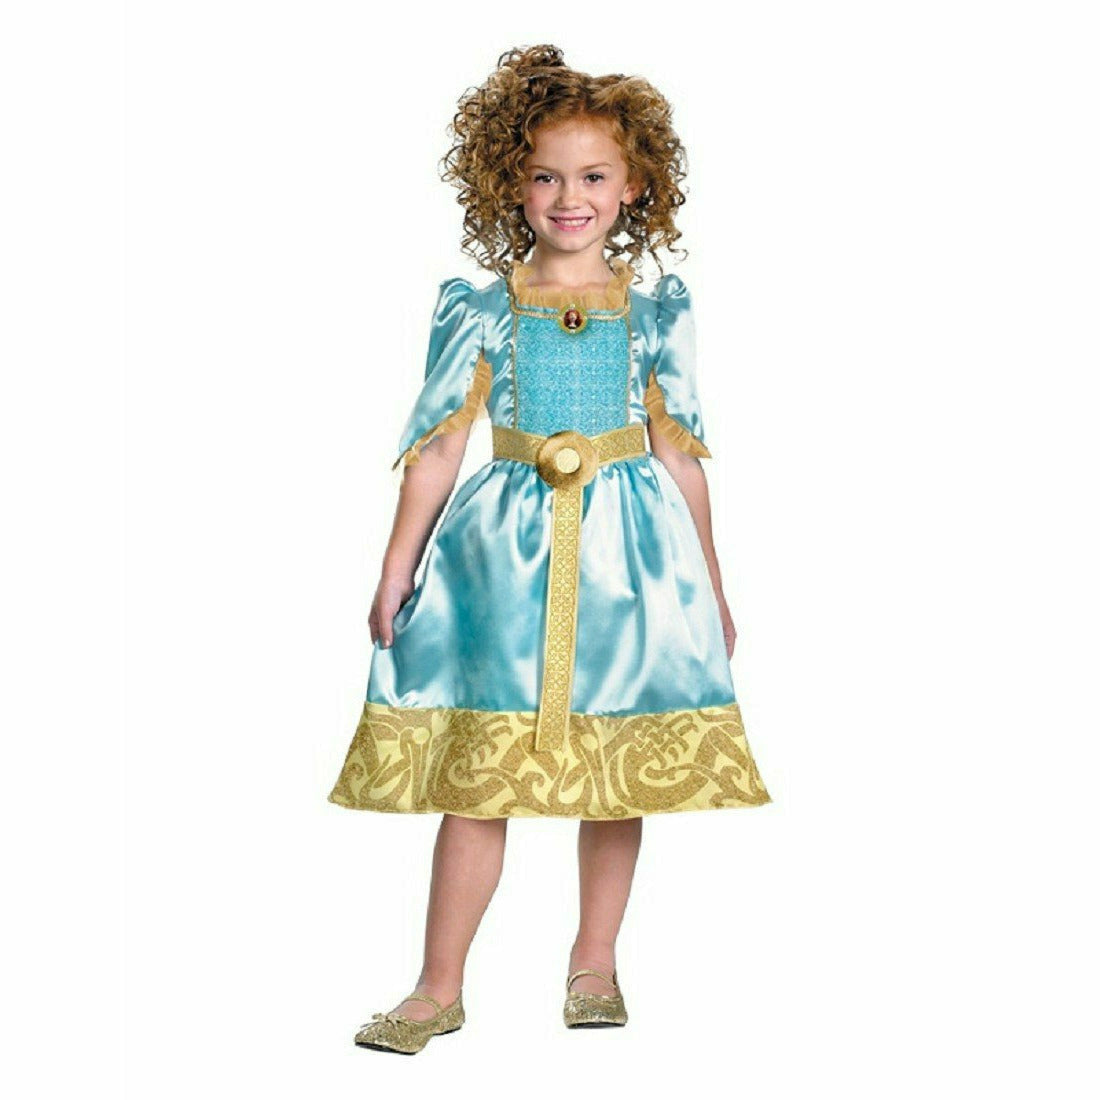 Ultimate Party Super Stores COSTUMES Girl's Merida Classic Halloween Costume - Brave